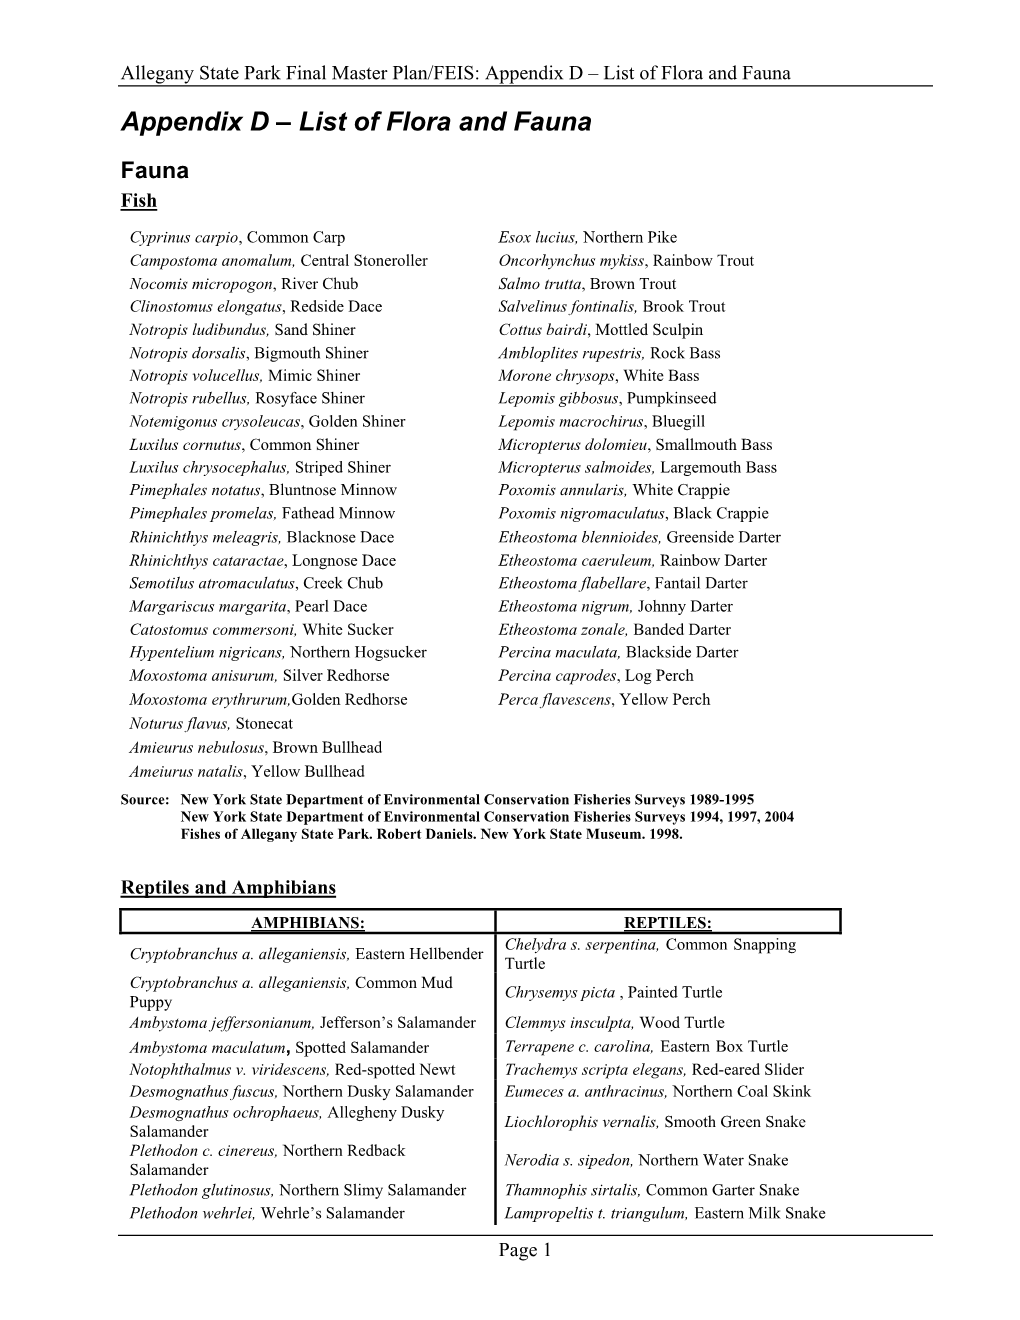 Allegany State Park Final Master Plan/FEIS: Appendix D – List of Flora and Fauna Appendix D – List of Flora and Fauna